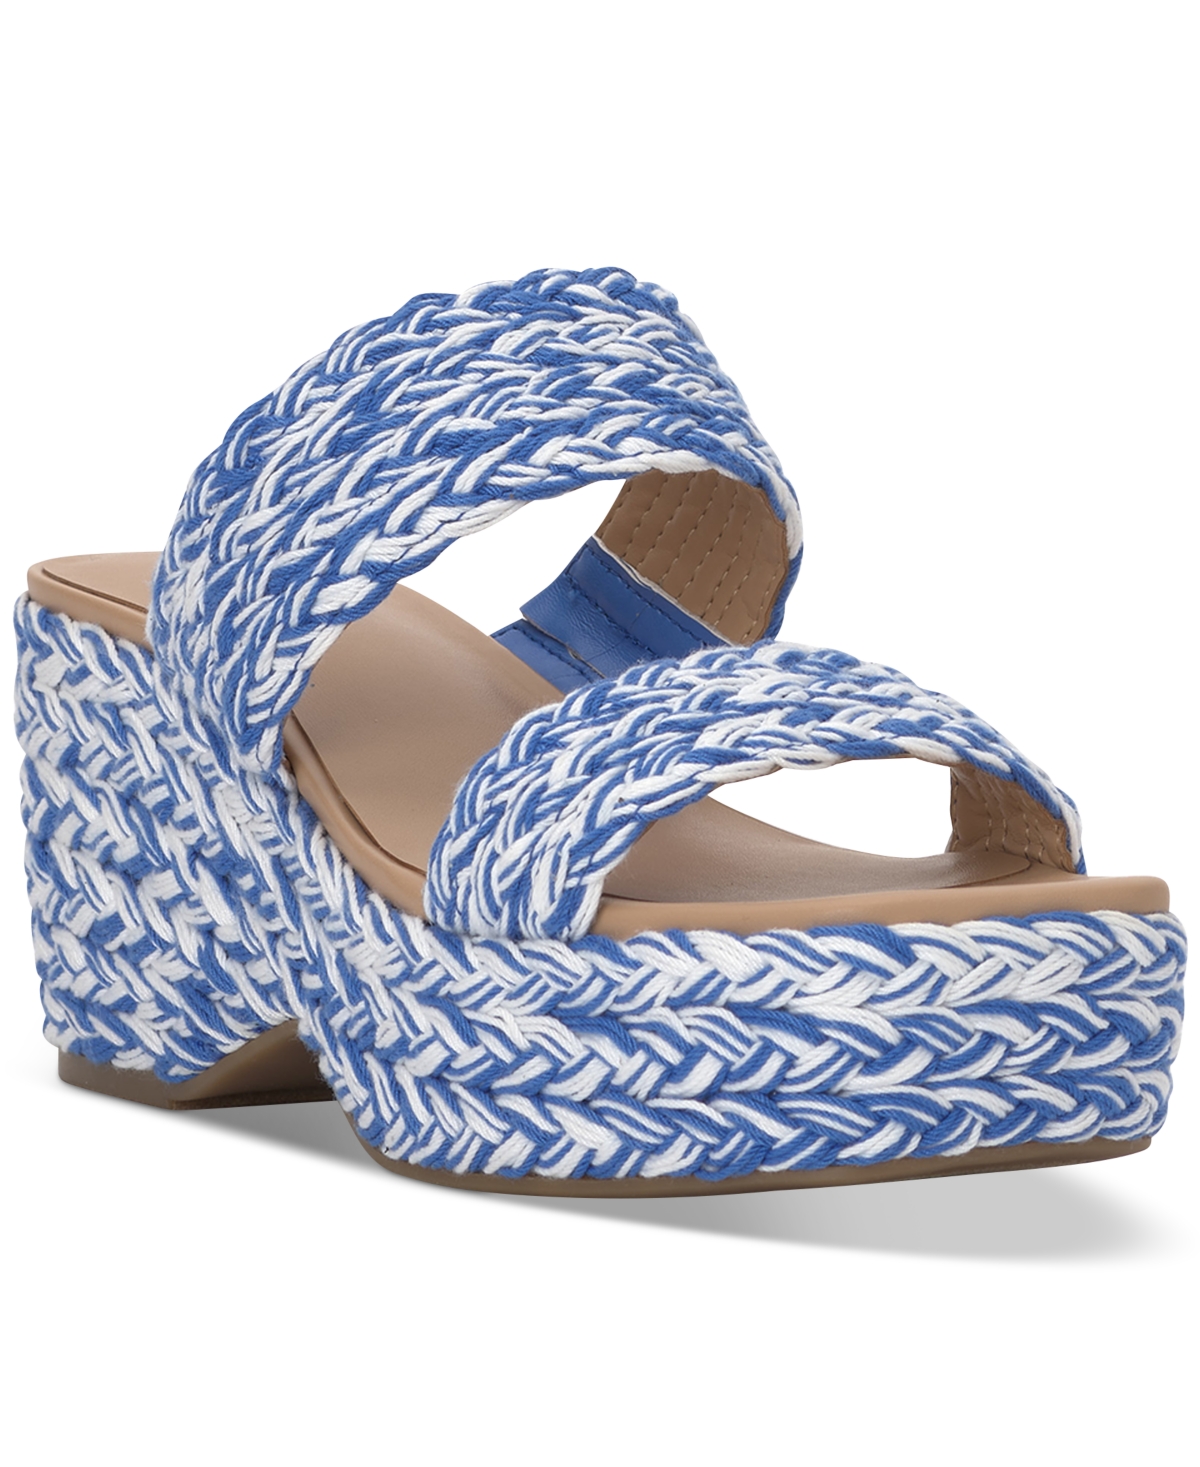 Women's Norina Woven Two Band Wedge Sandals, Created for Macy's - Pink Multi Raffia